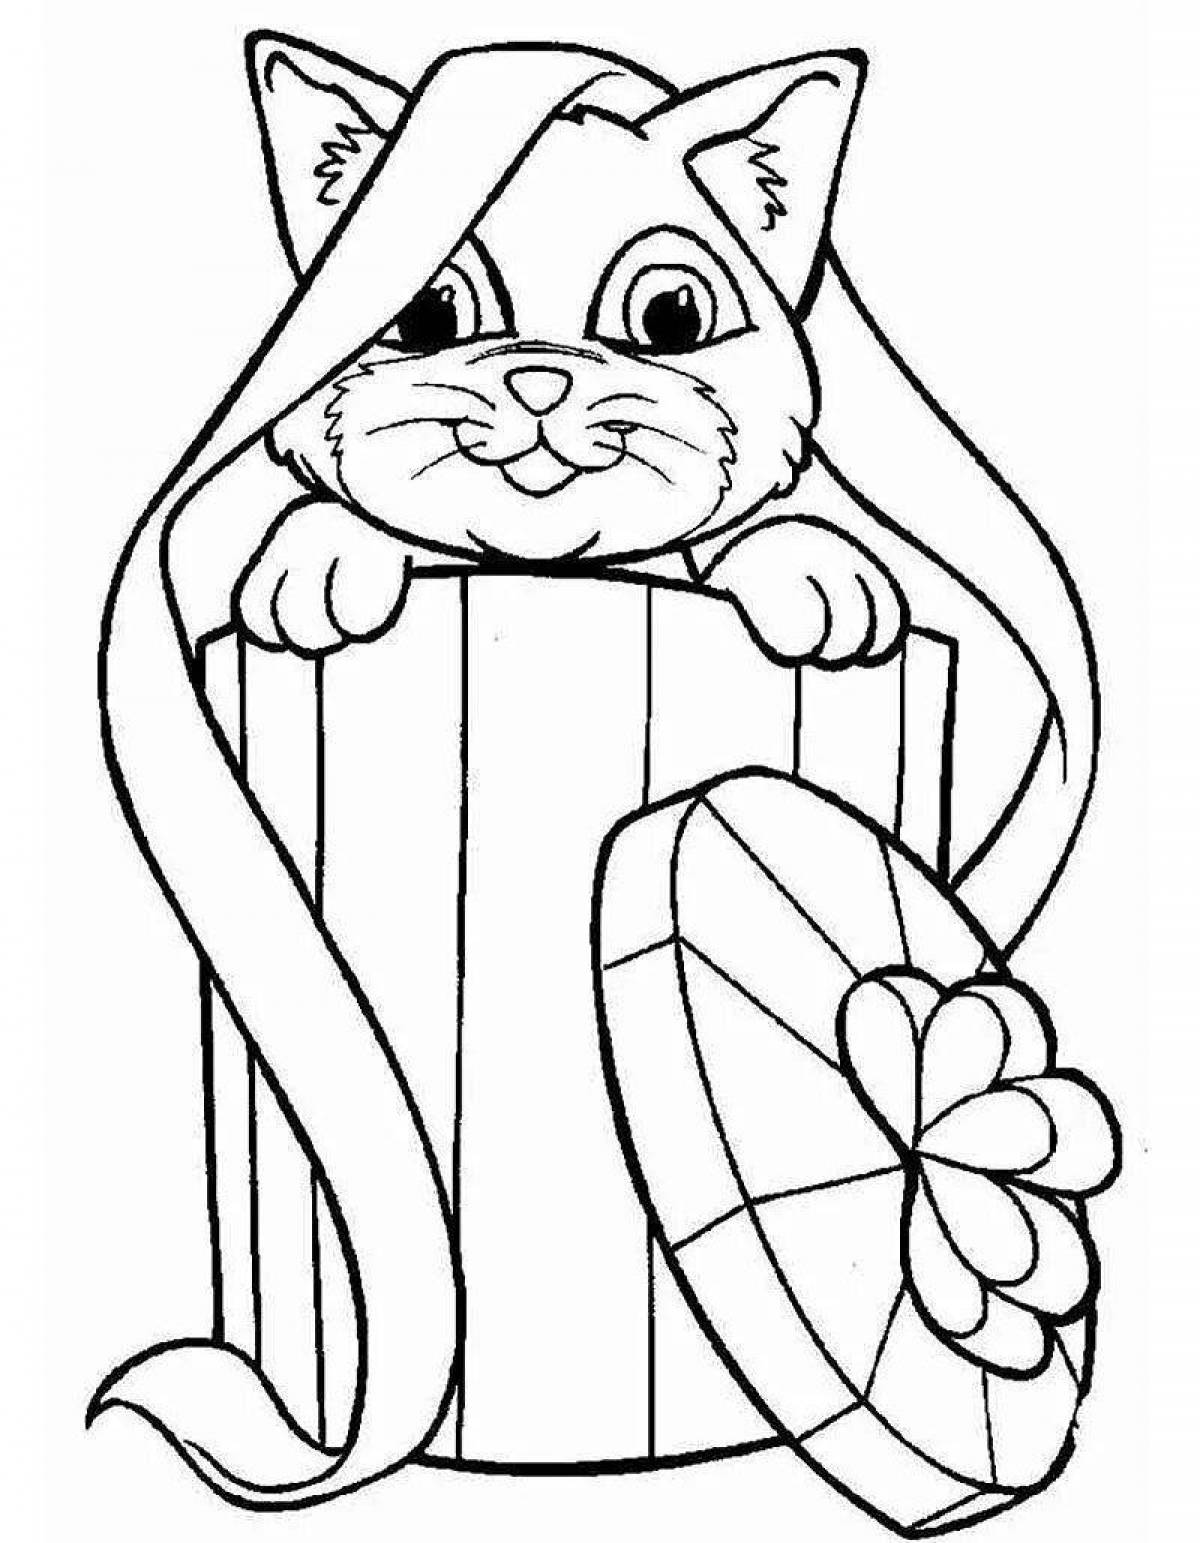 Kitty magic coloring book for kids 6-7 years old